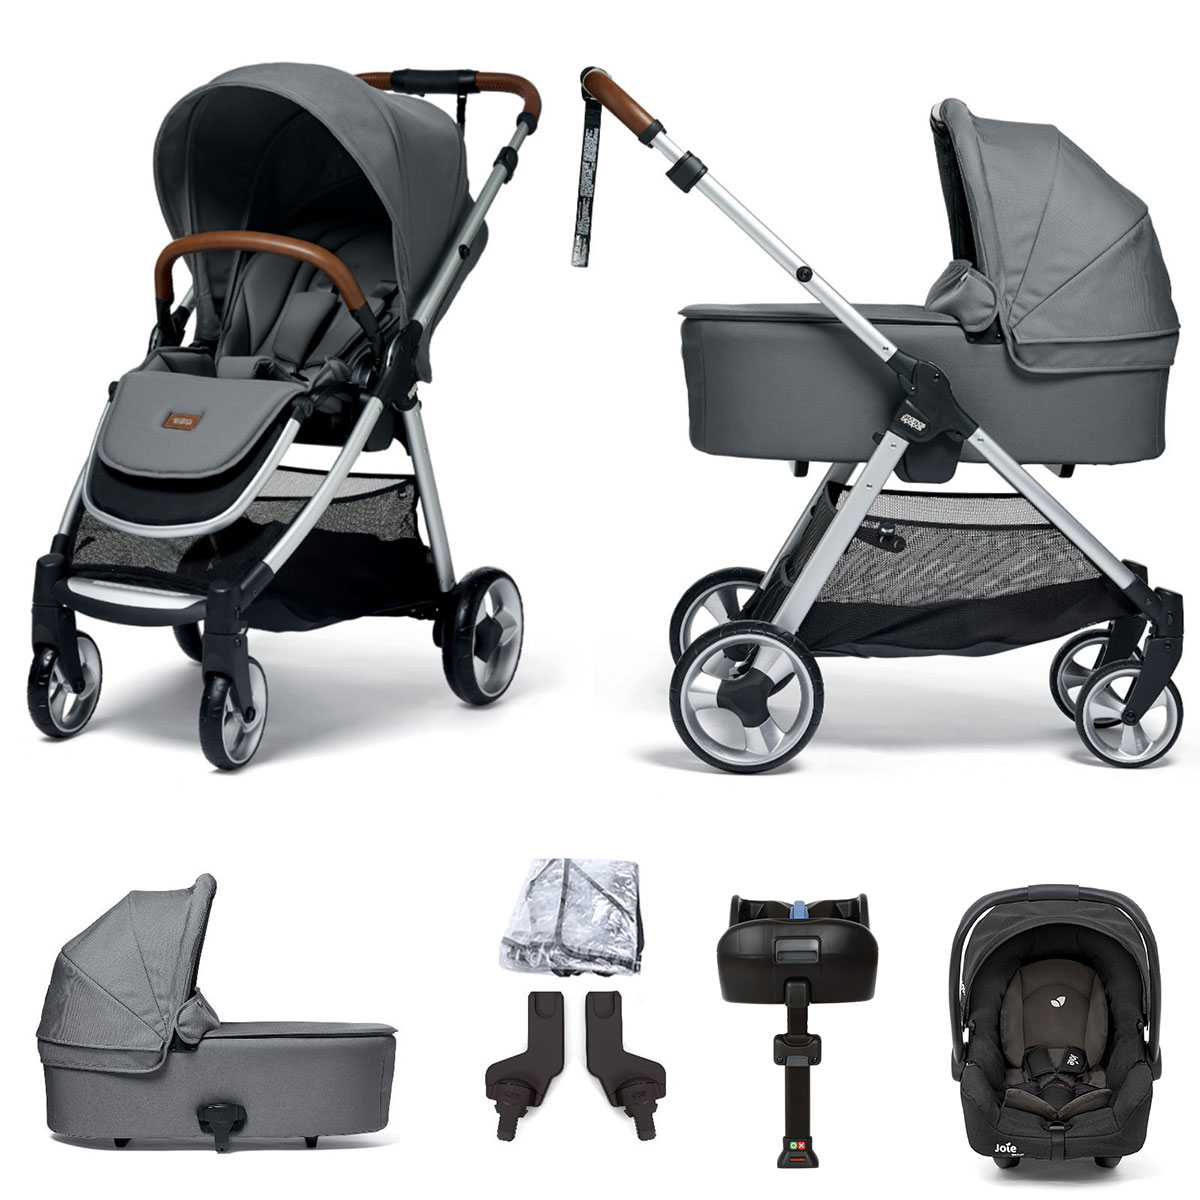 Mamas & Papas Flip XT2 (Gemm Car Seat) Travel System with Carrycot & ISOFIX Base - Fossil Grey